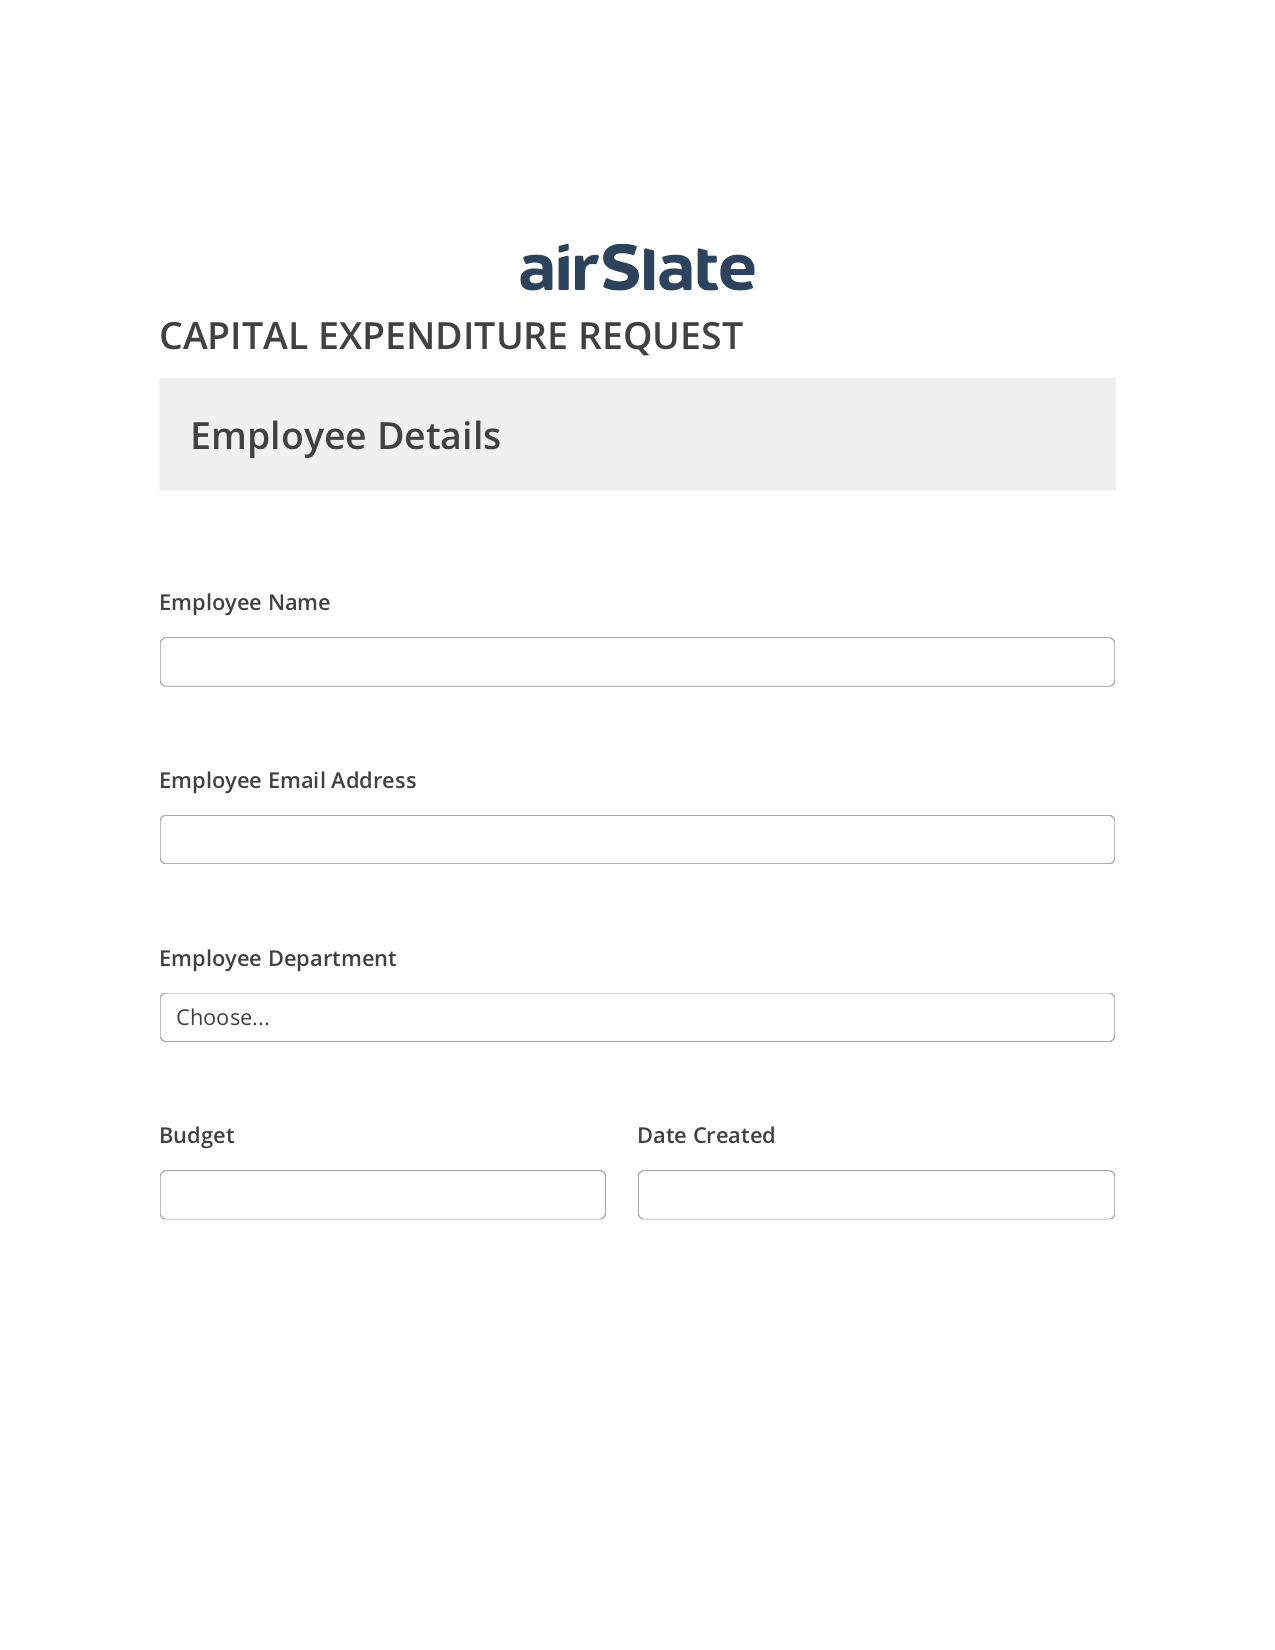 Capital Expenditure Request Approval Workflow Pre-fill from Salesforce Records with SOQL Bot, Mailchimp send Campaign bot, Export to Google Sheet Bot